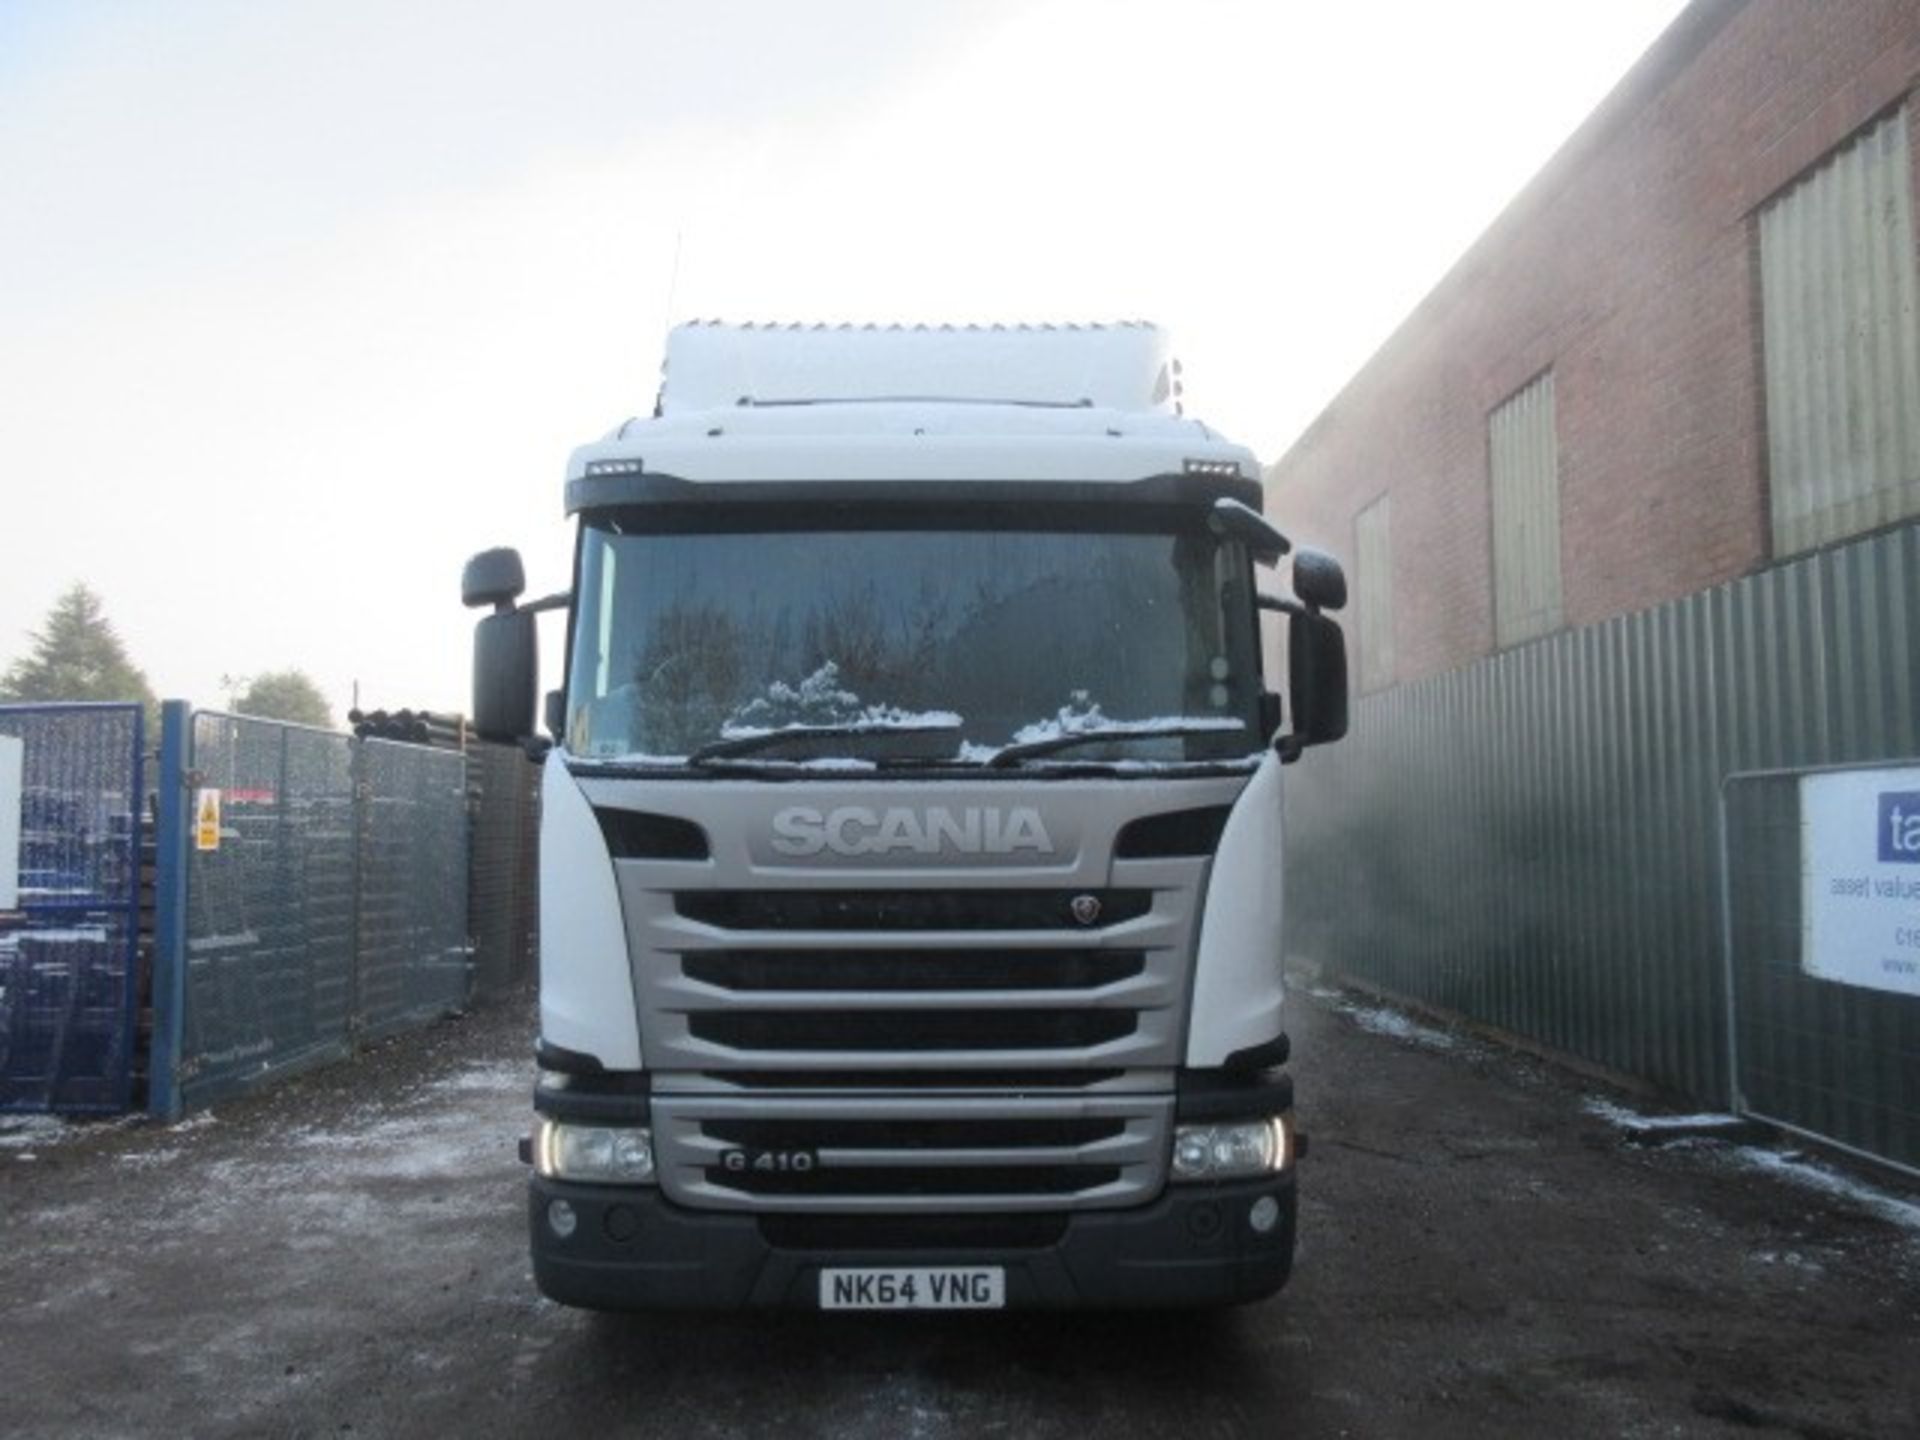 Scania G410 LA6X2/2MNA Tractor unit (2014, '64') - NK64 VNG - Image 2 of 10